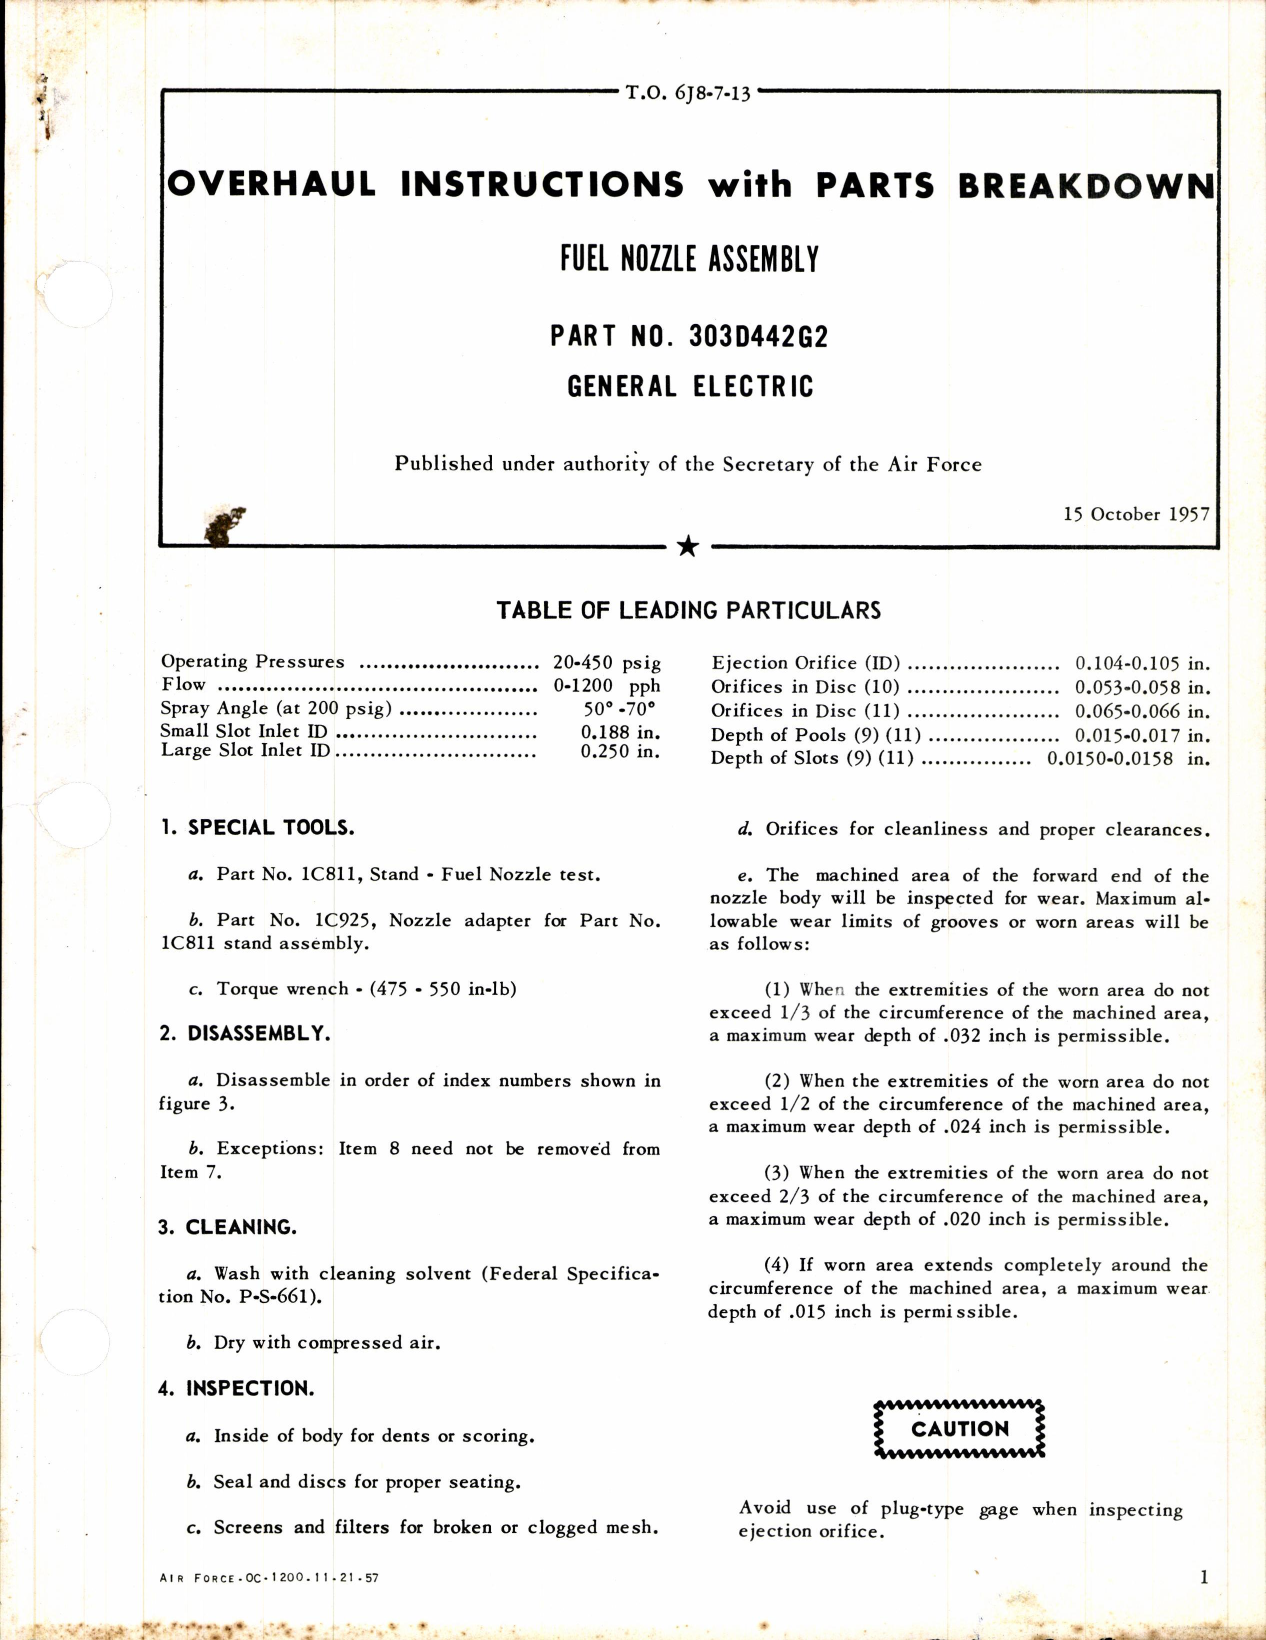 Sample page 1 from AirCorps Library document: Overhaul Instructions with Parts Breakdown for Fuel Nozzle Assembly Part No. 303D442G2